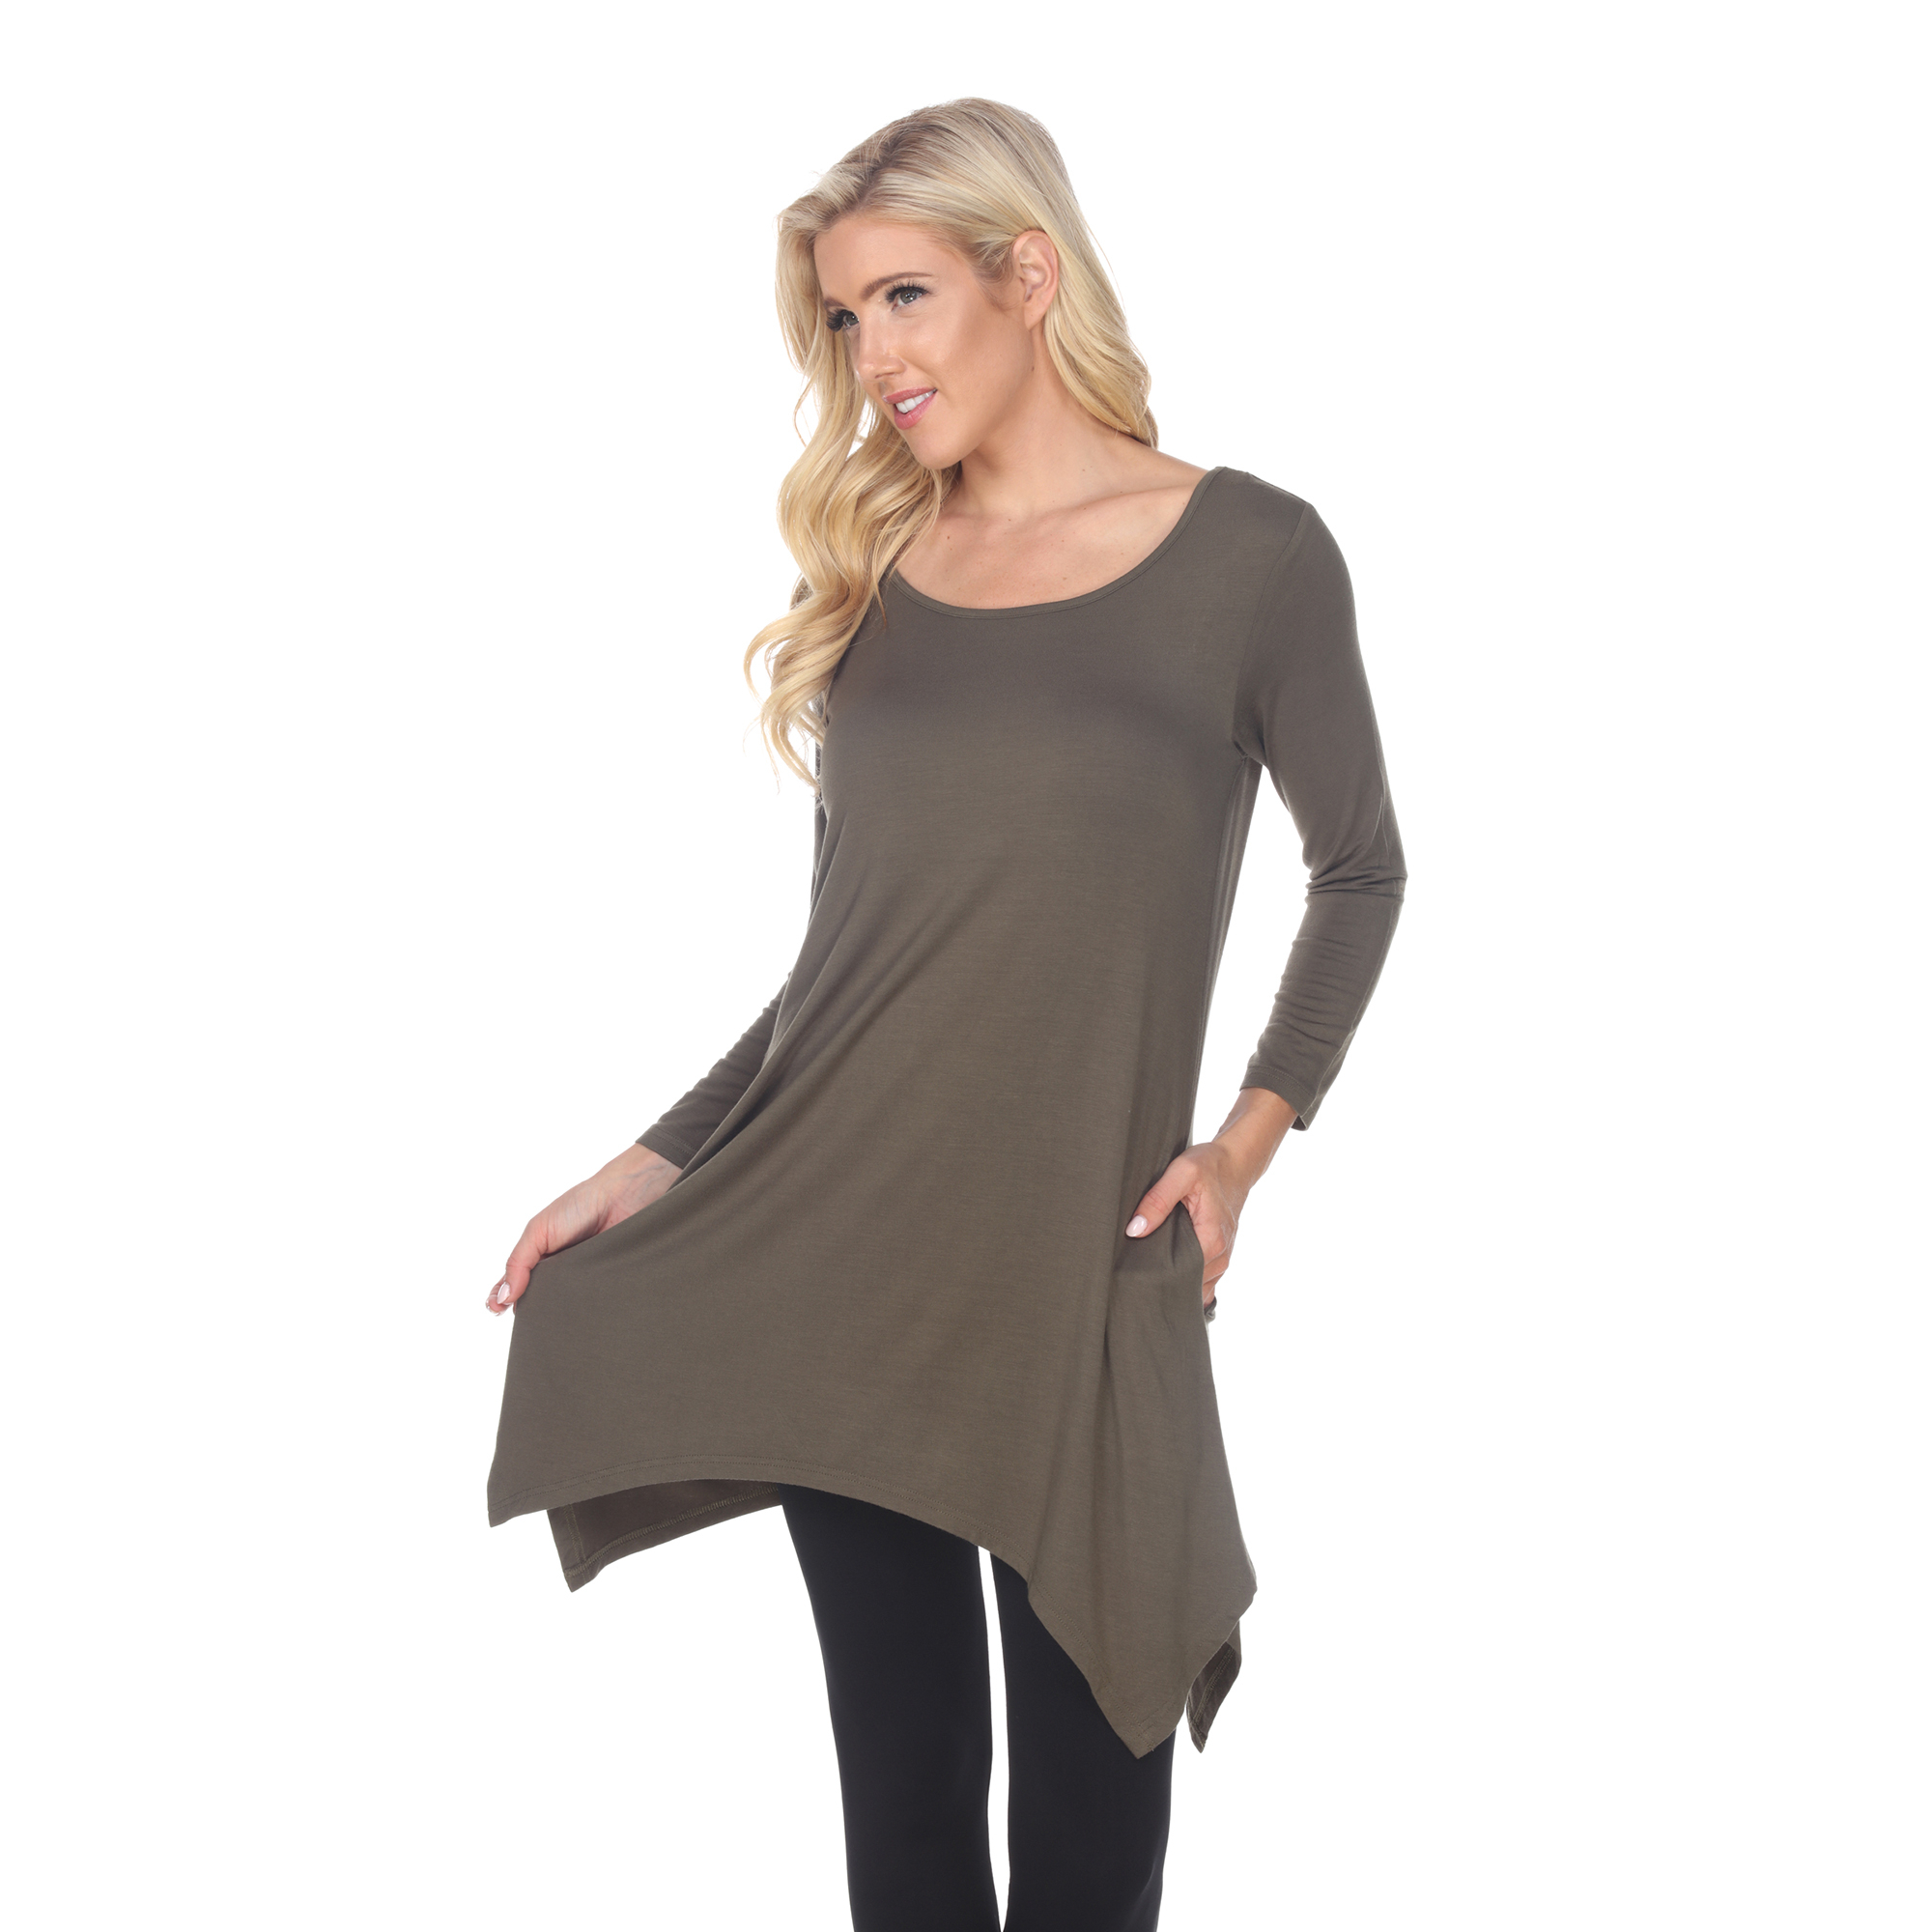 White Mark Women's Quarter Sleeve Tunic Top With Pockets - Olive, Large